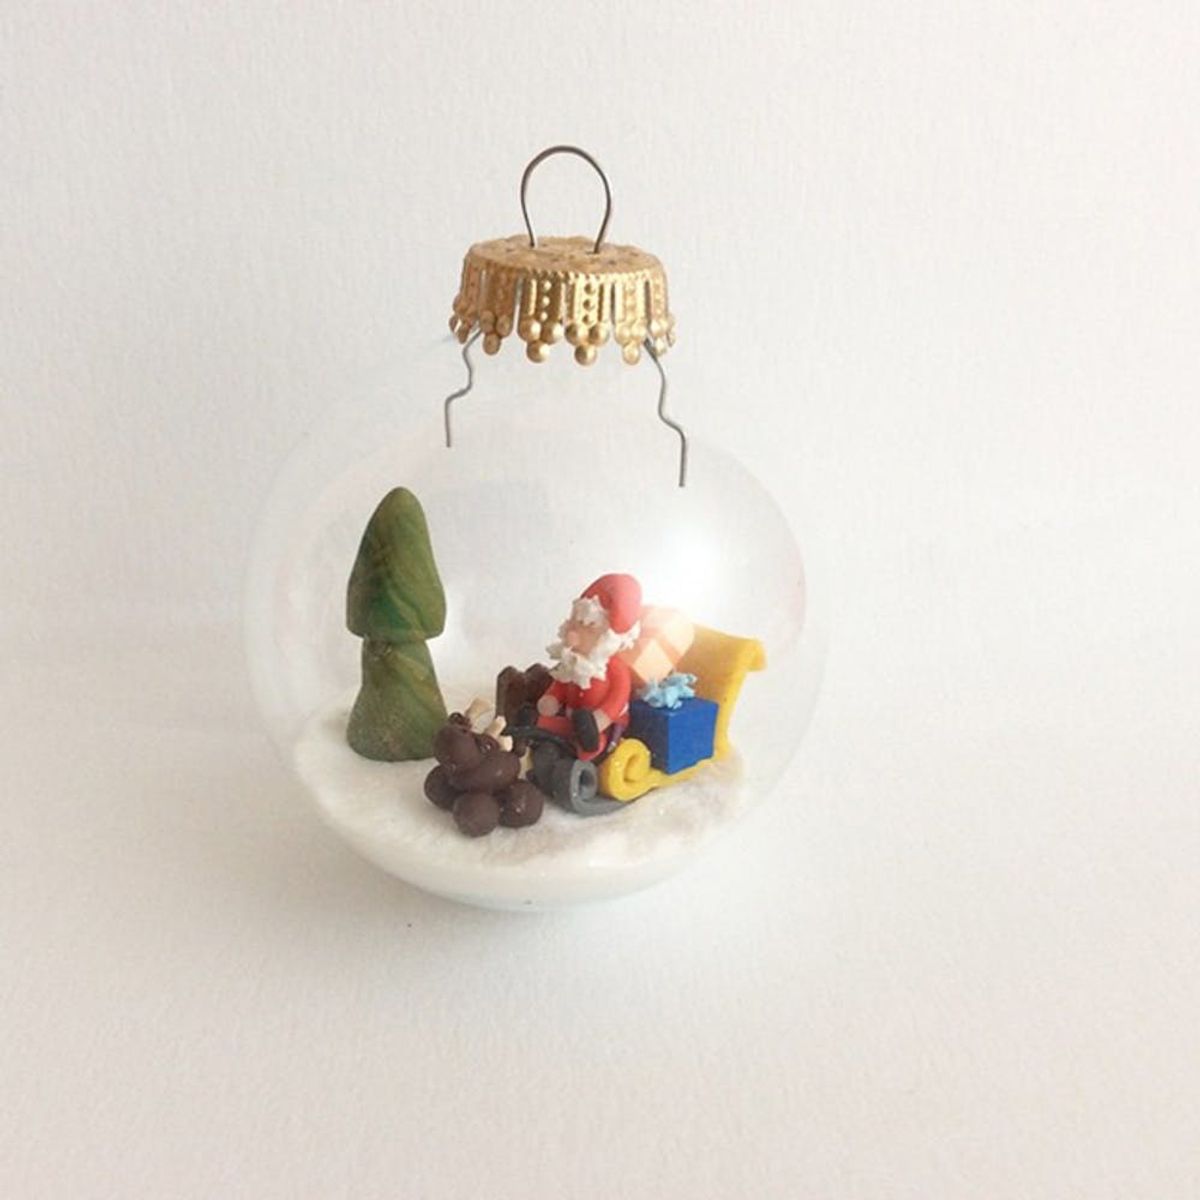 This Artist Makes Ornaments to Decorate With All Year